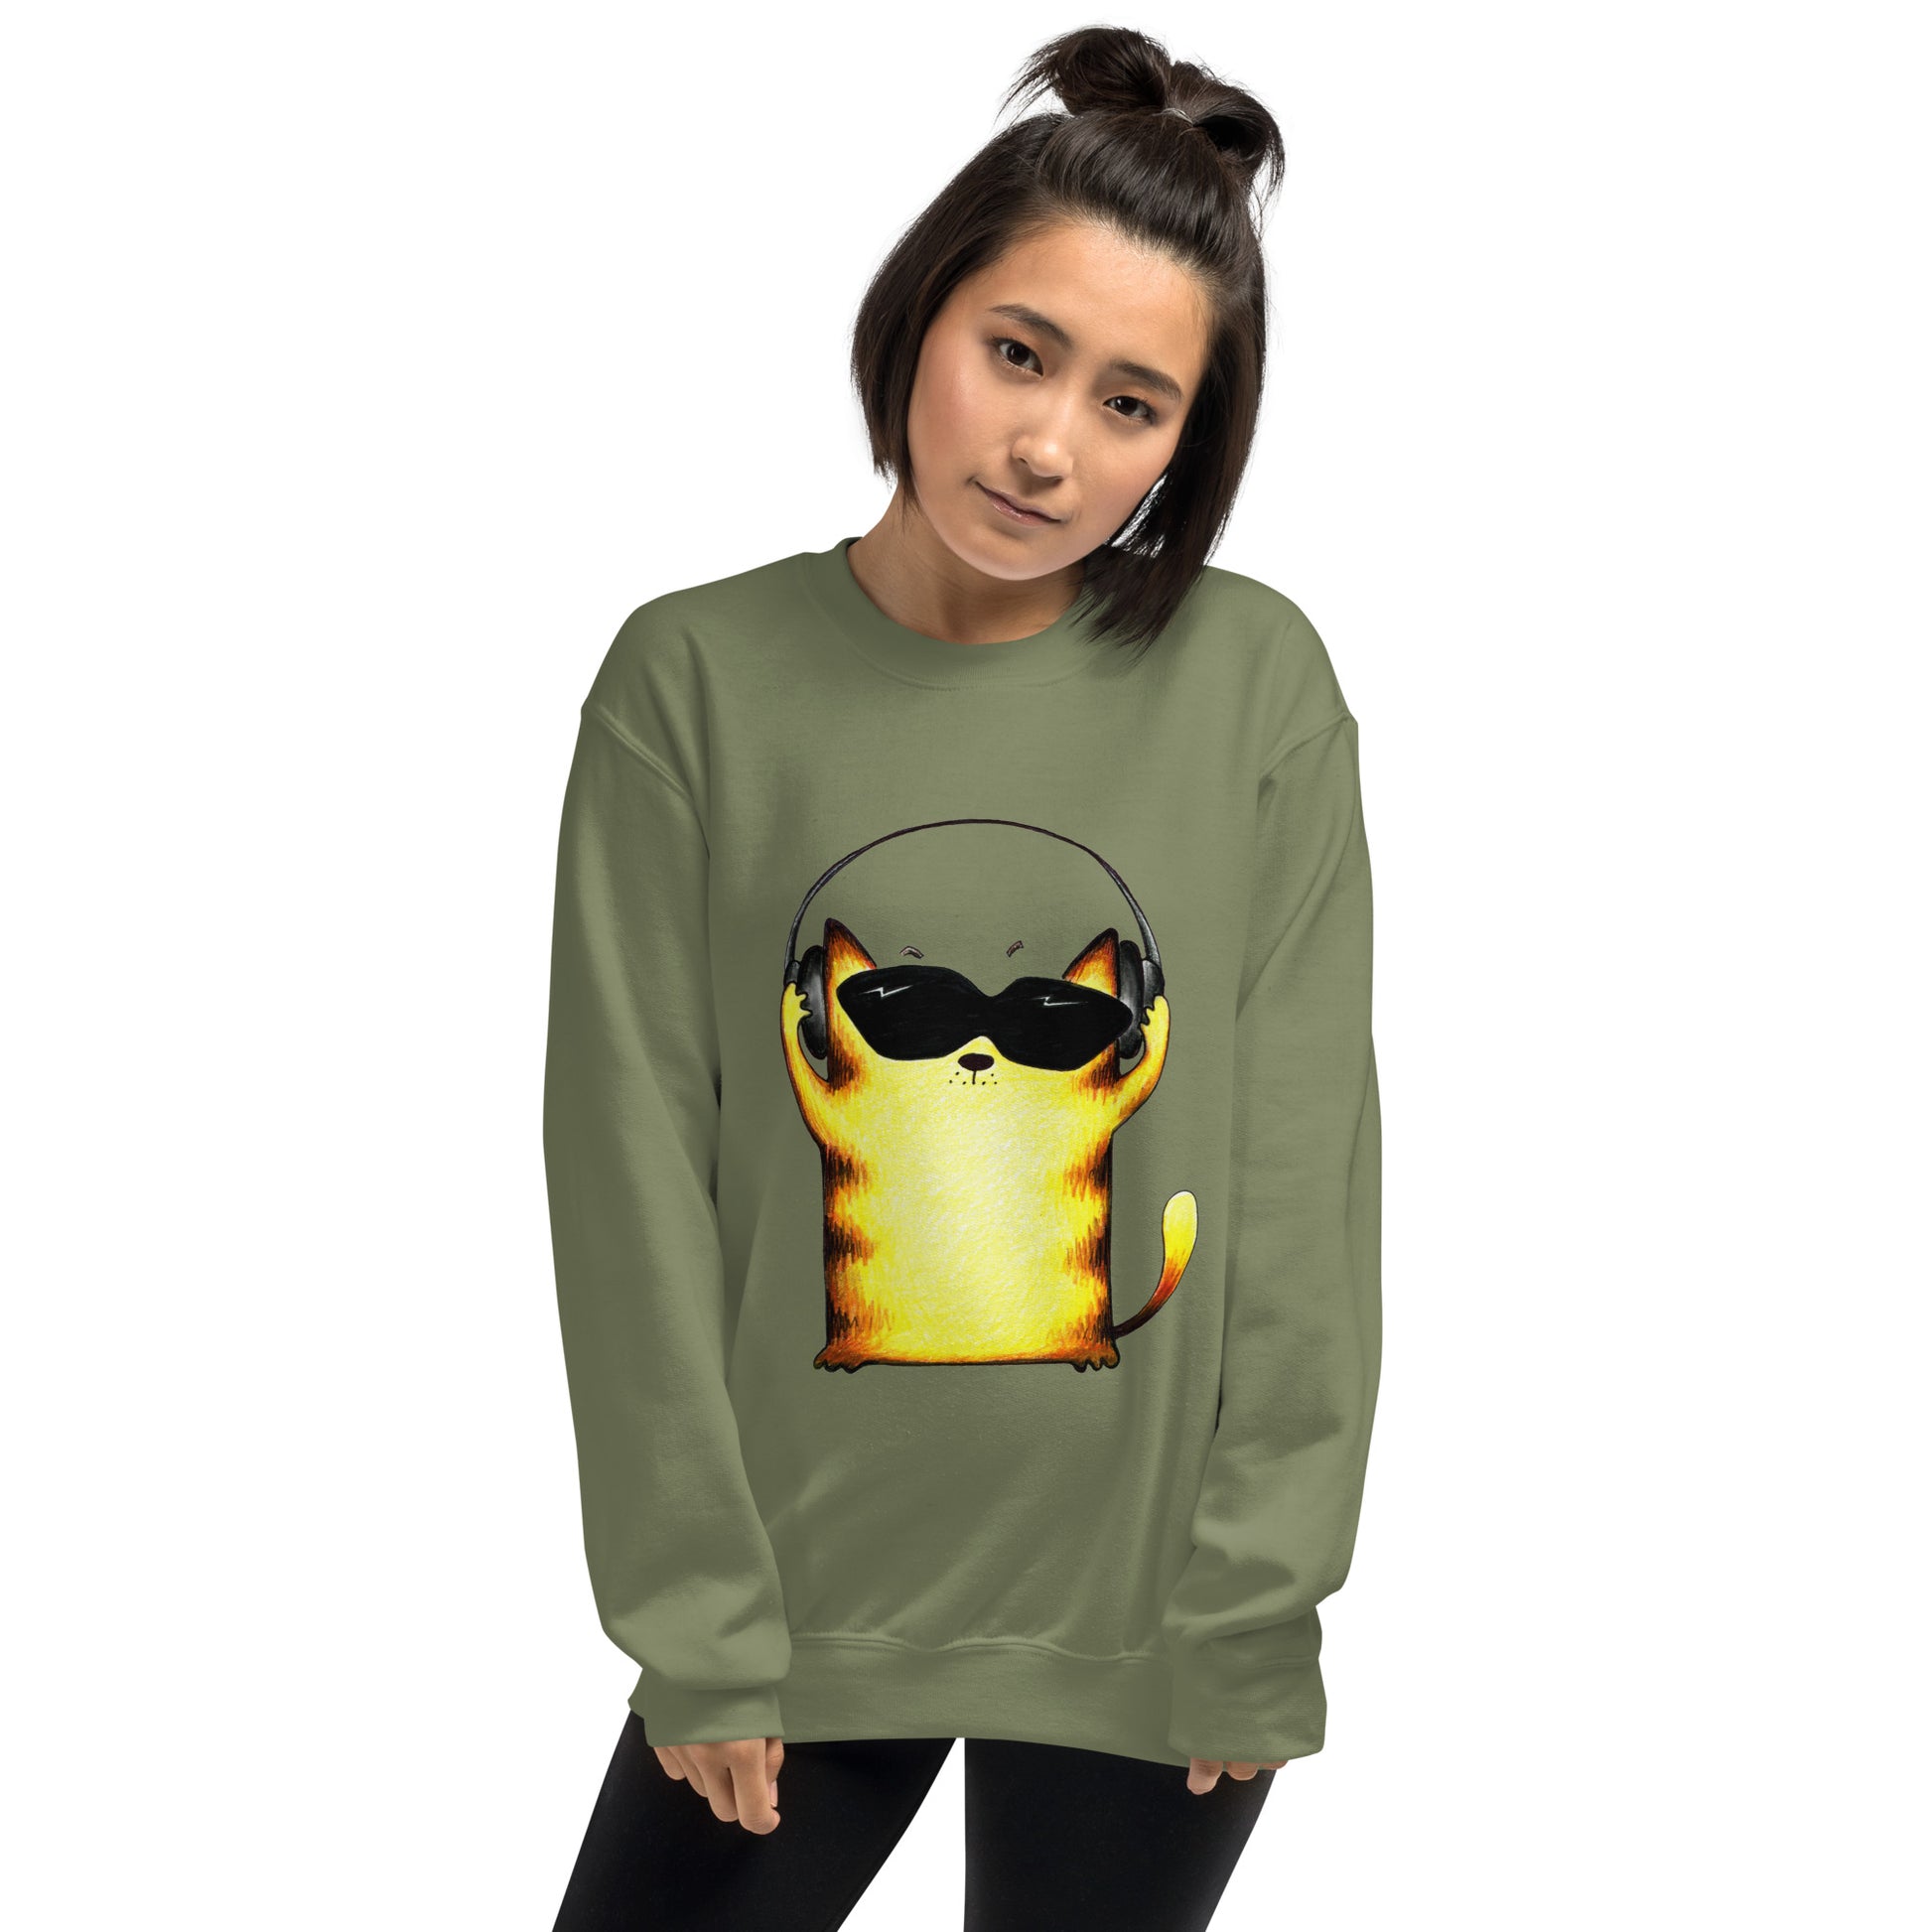 Green swearshirt with Cat and headphones